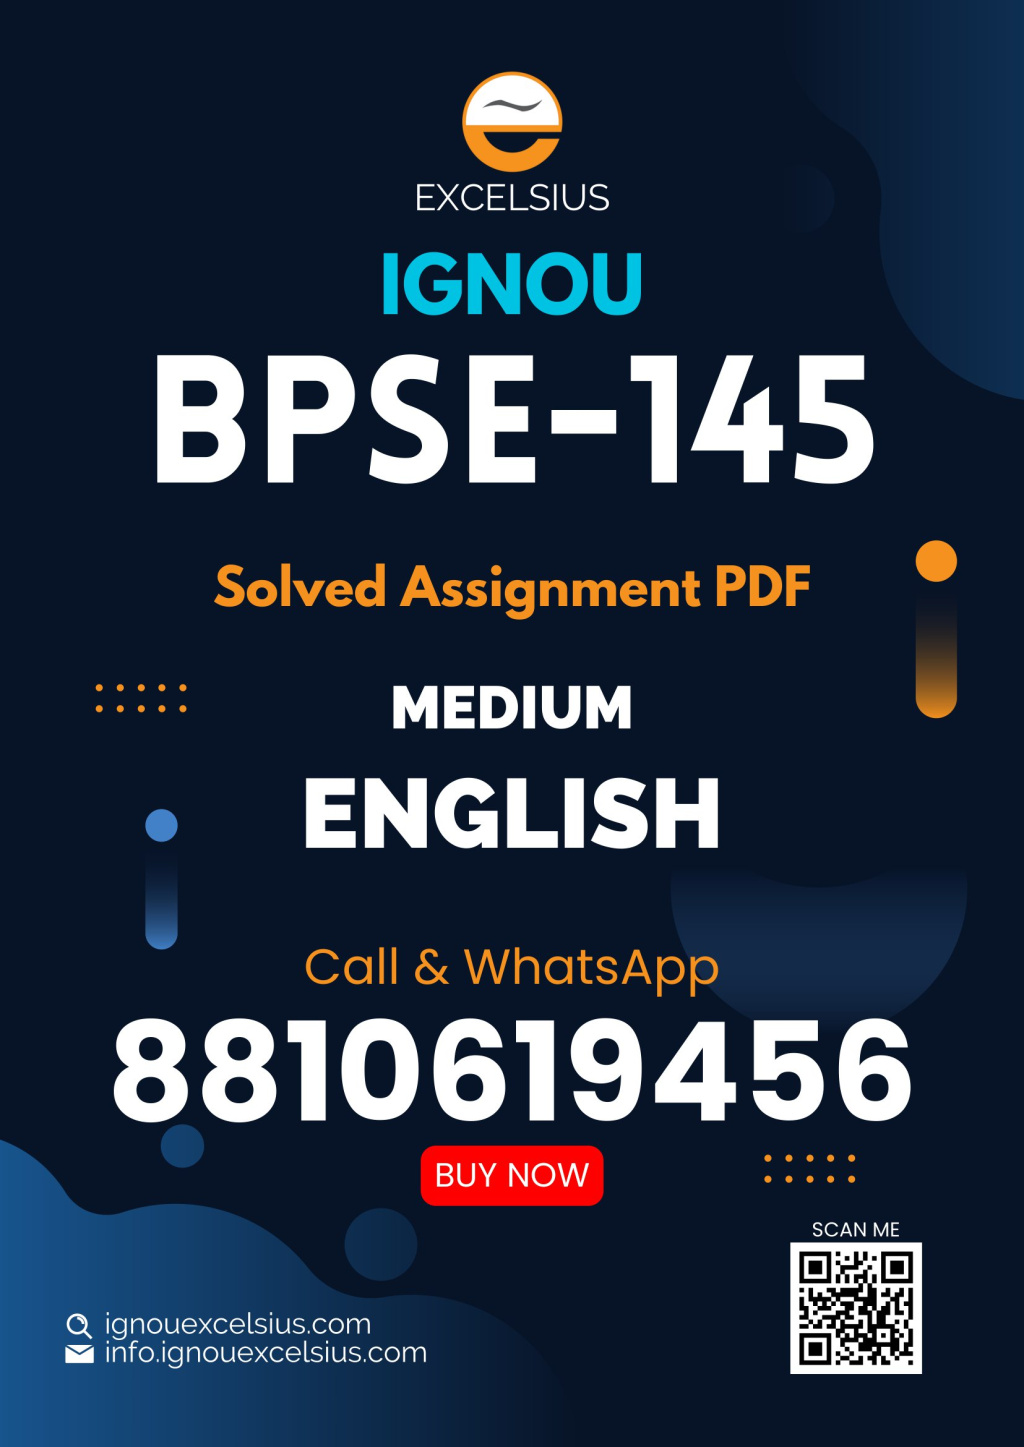 IGNOU BPSE-145 - Democracy and Development in Northeast India, Latest Solved Assignment-July 2022 – January 2023